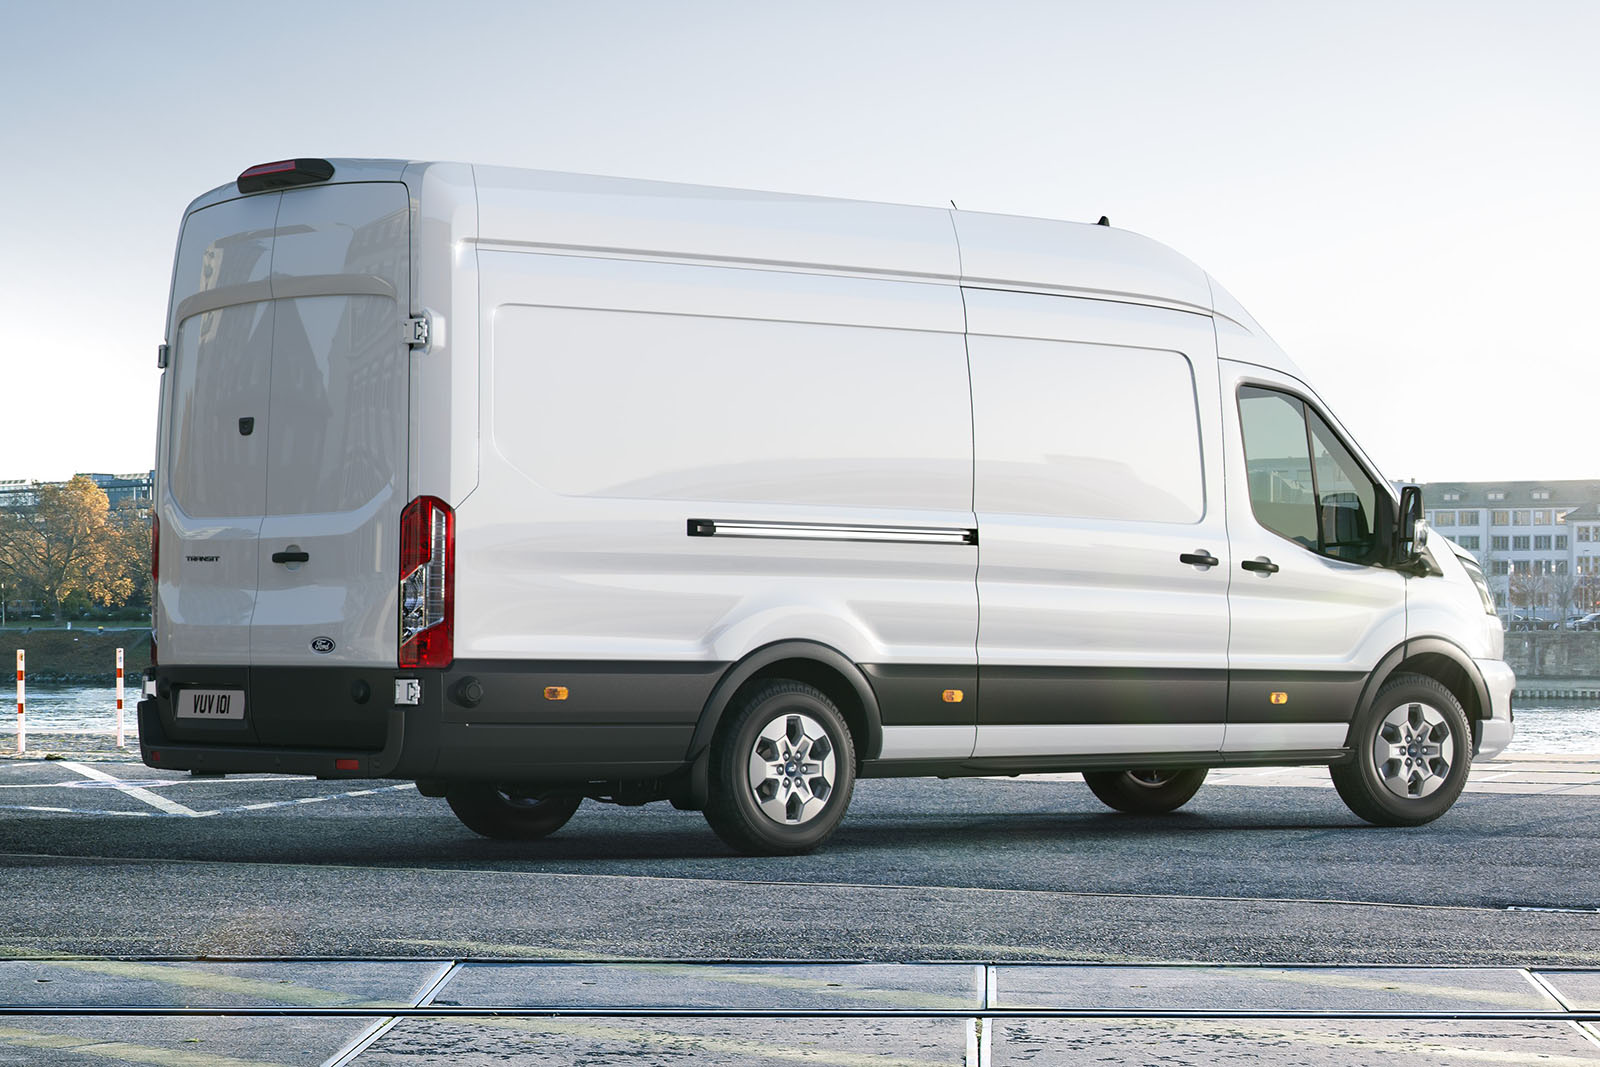 https://www.autocar.co.uk/sites/autocar.co.uk/files/images/car-reviews/first-drives/legacy/ford_transit_rear_three_quarter_0.jpg